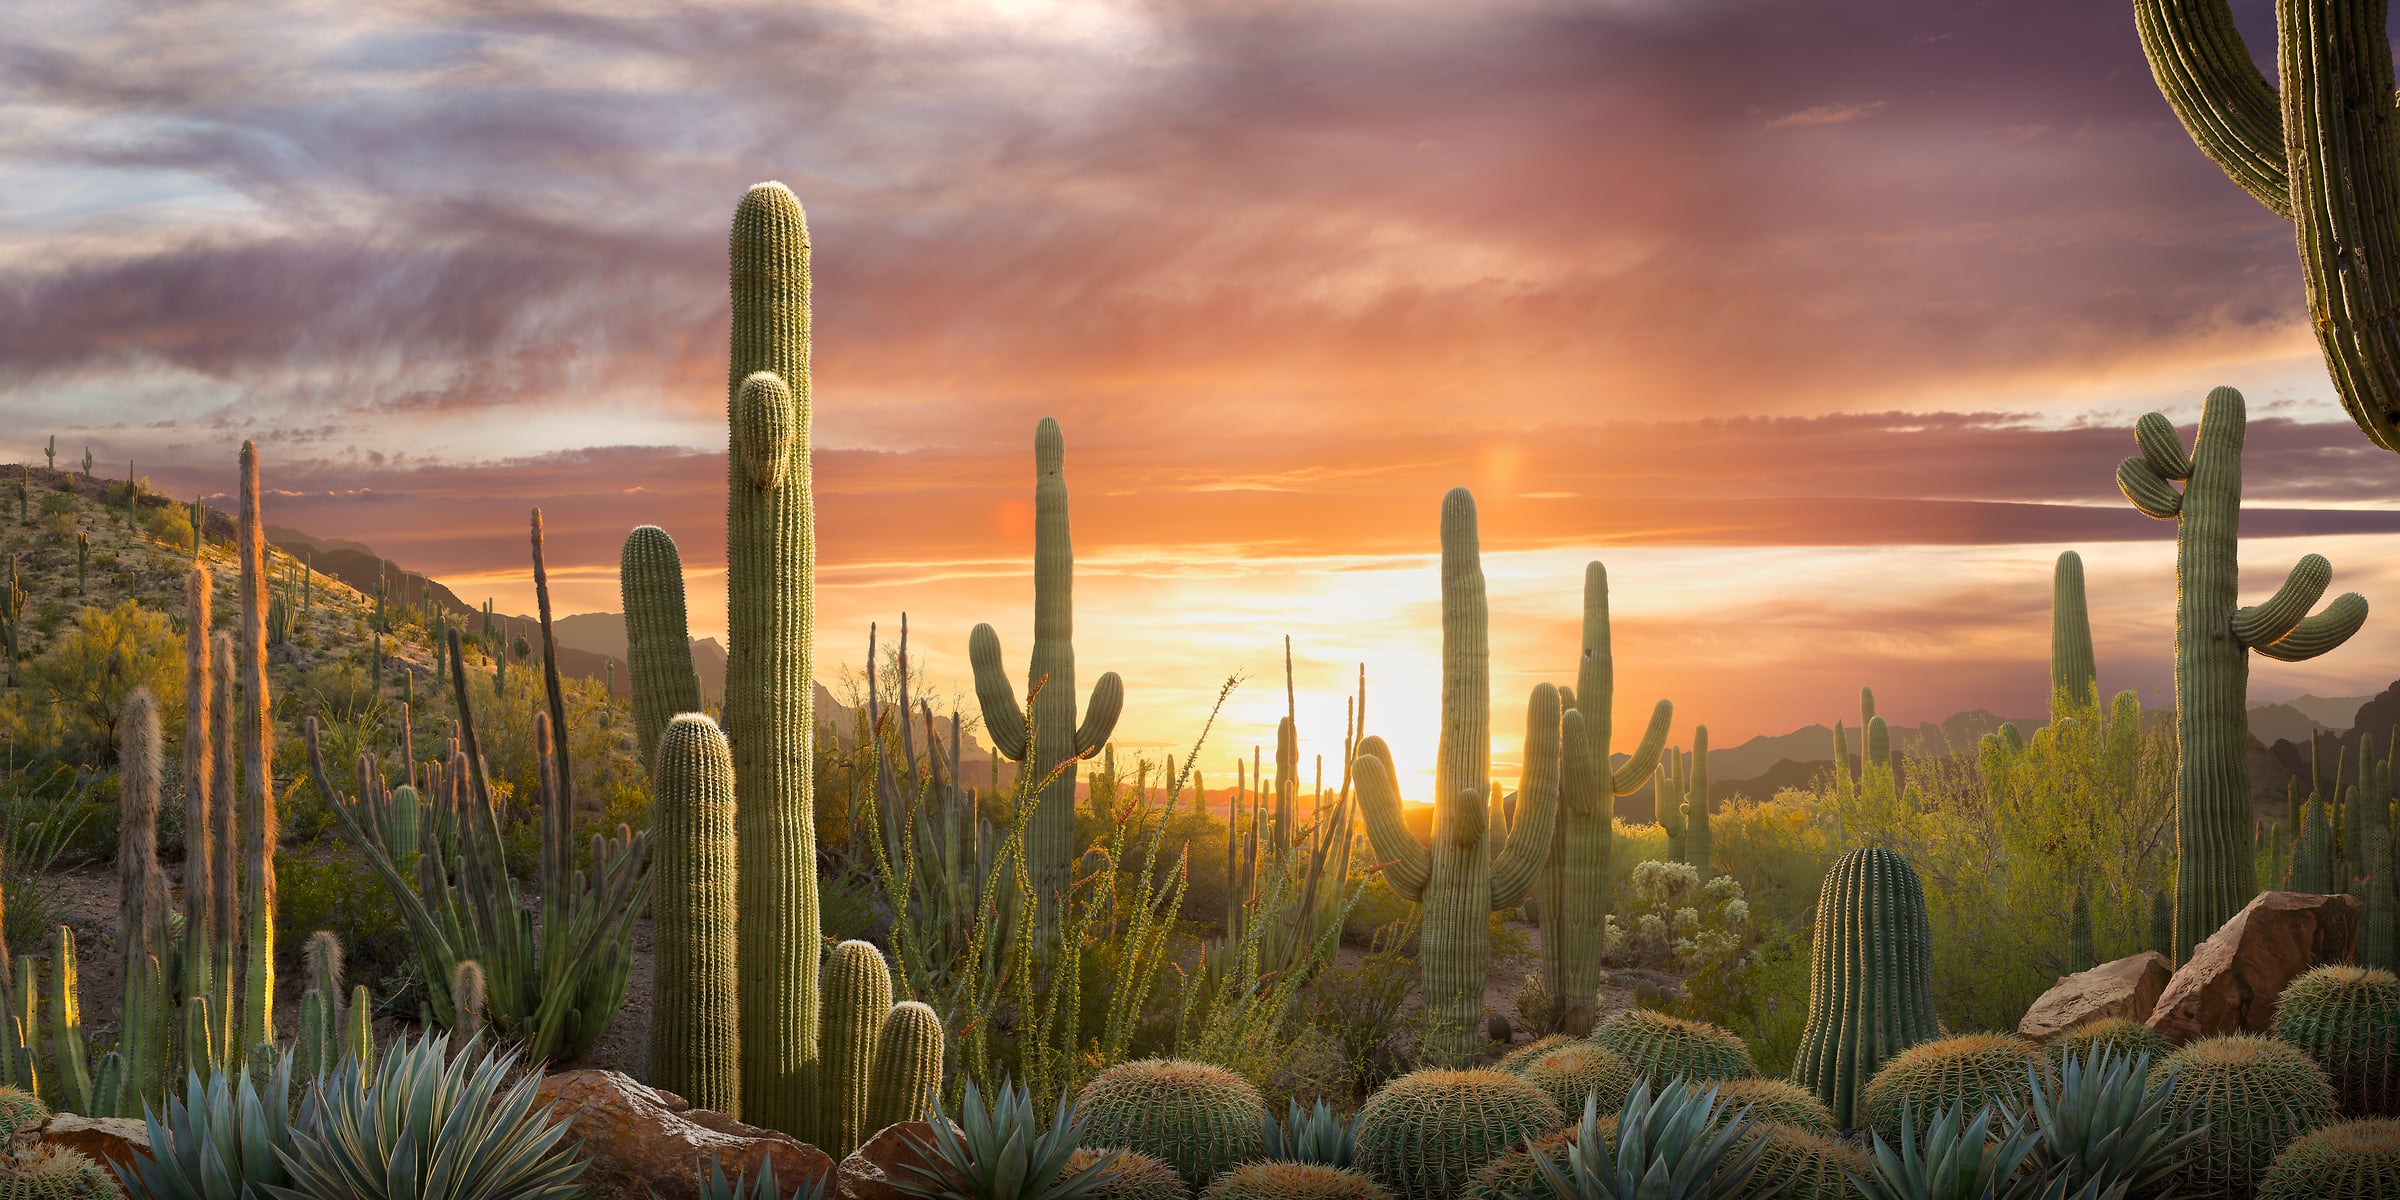 252 megapixels! A very high resolution, large-format VAST photo print of a sunset in the desert with cacti; landscape photograph created by Nick Pedersen in Superstition Mountains, Arizona.